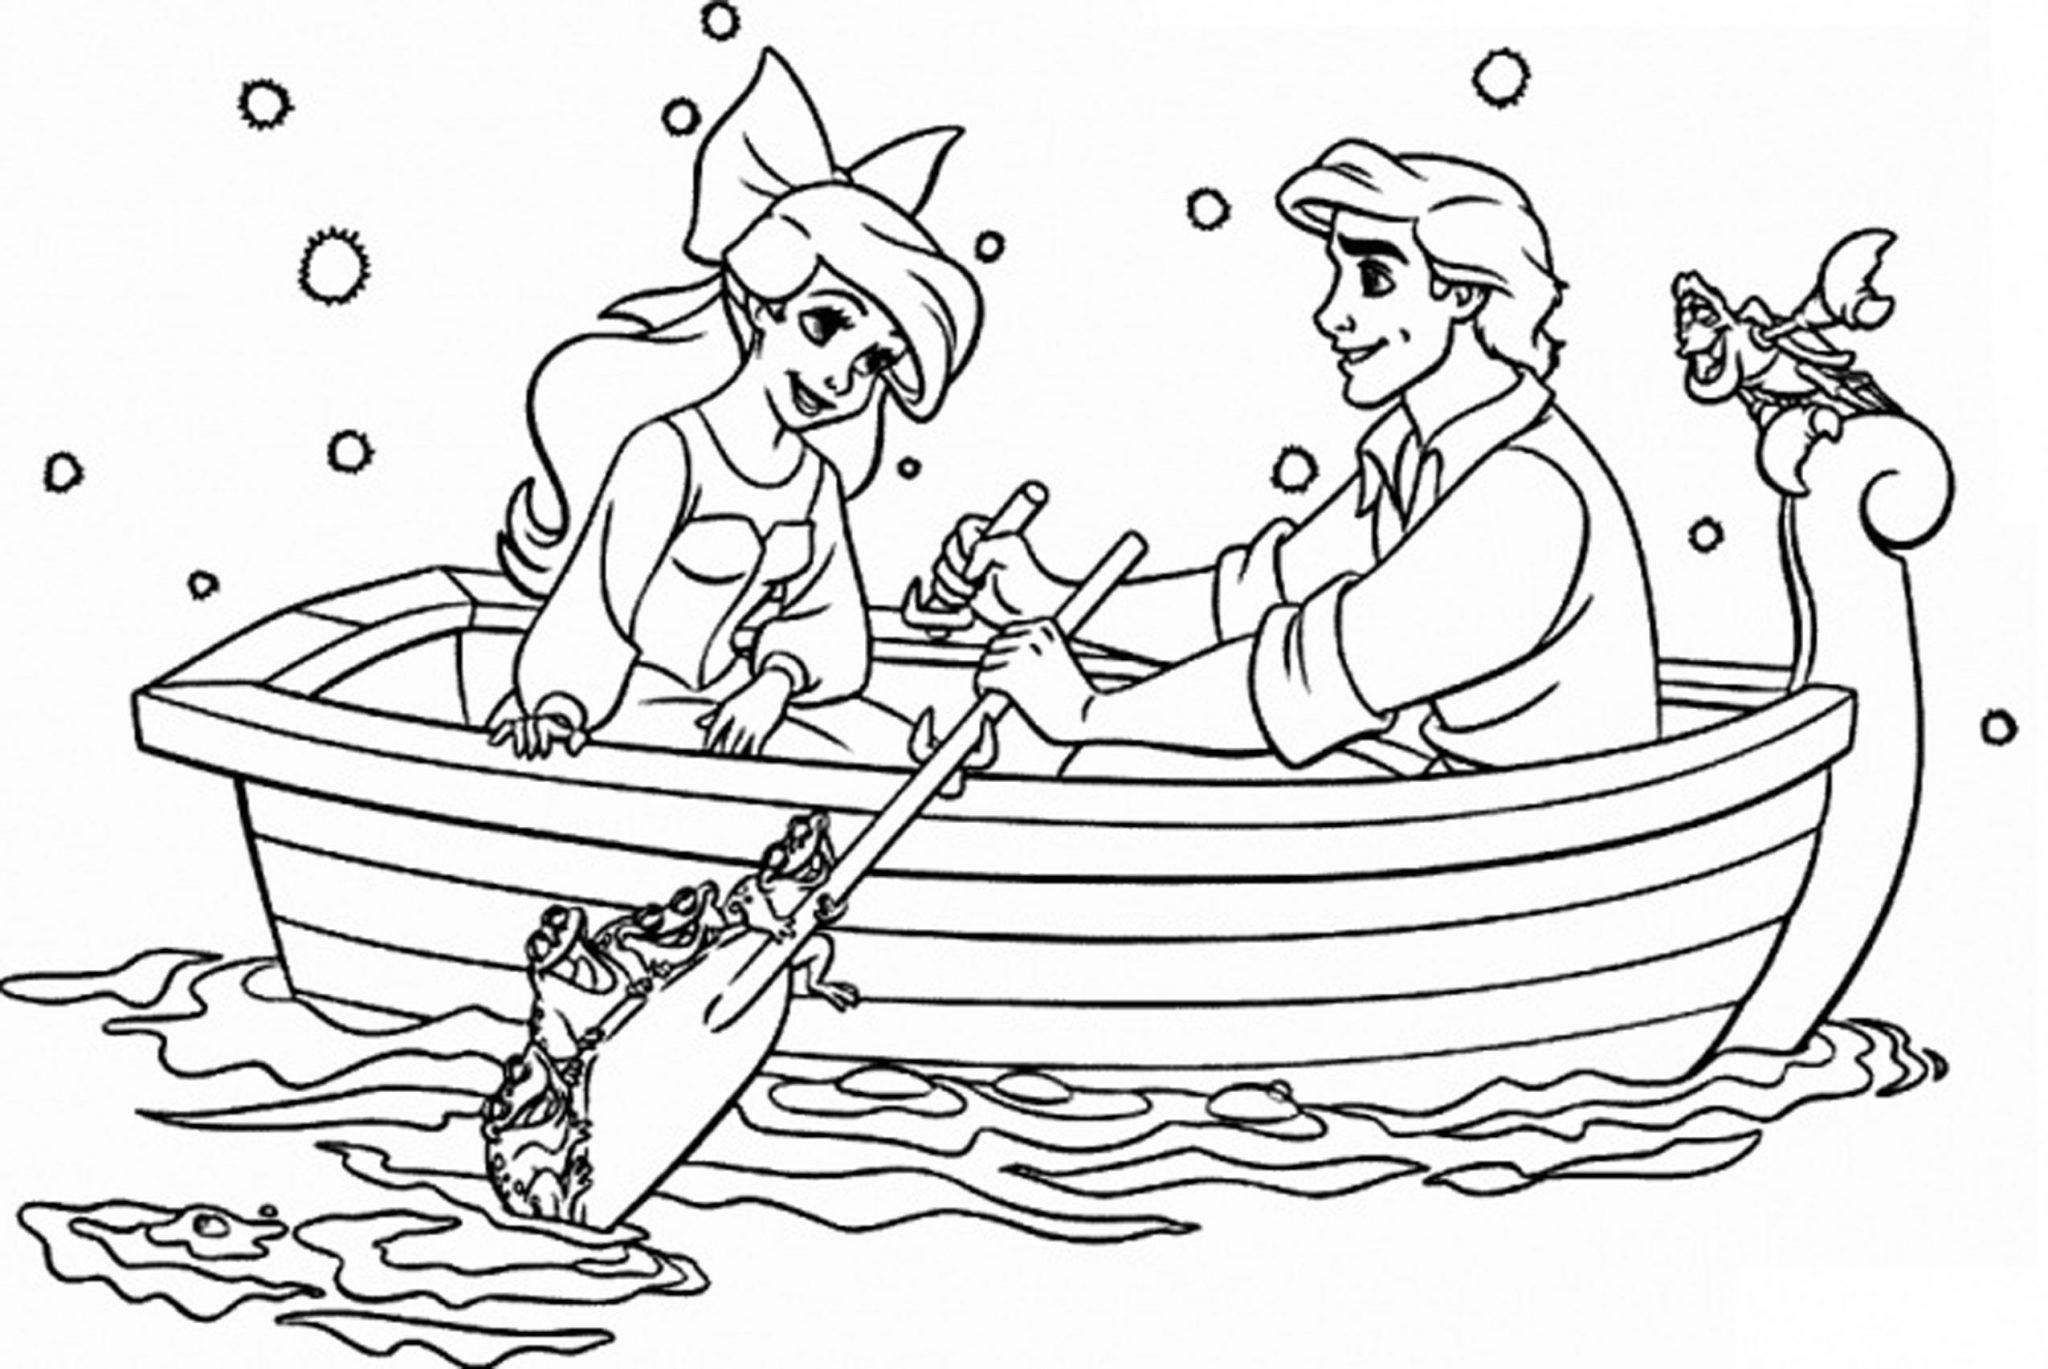 20 Free [Jun 20] Disney Coloring Pages for Kids   Printable